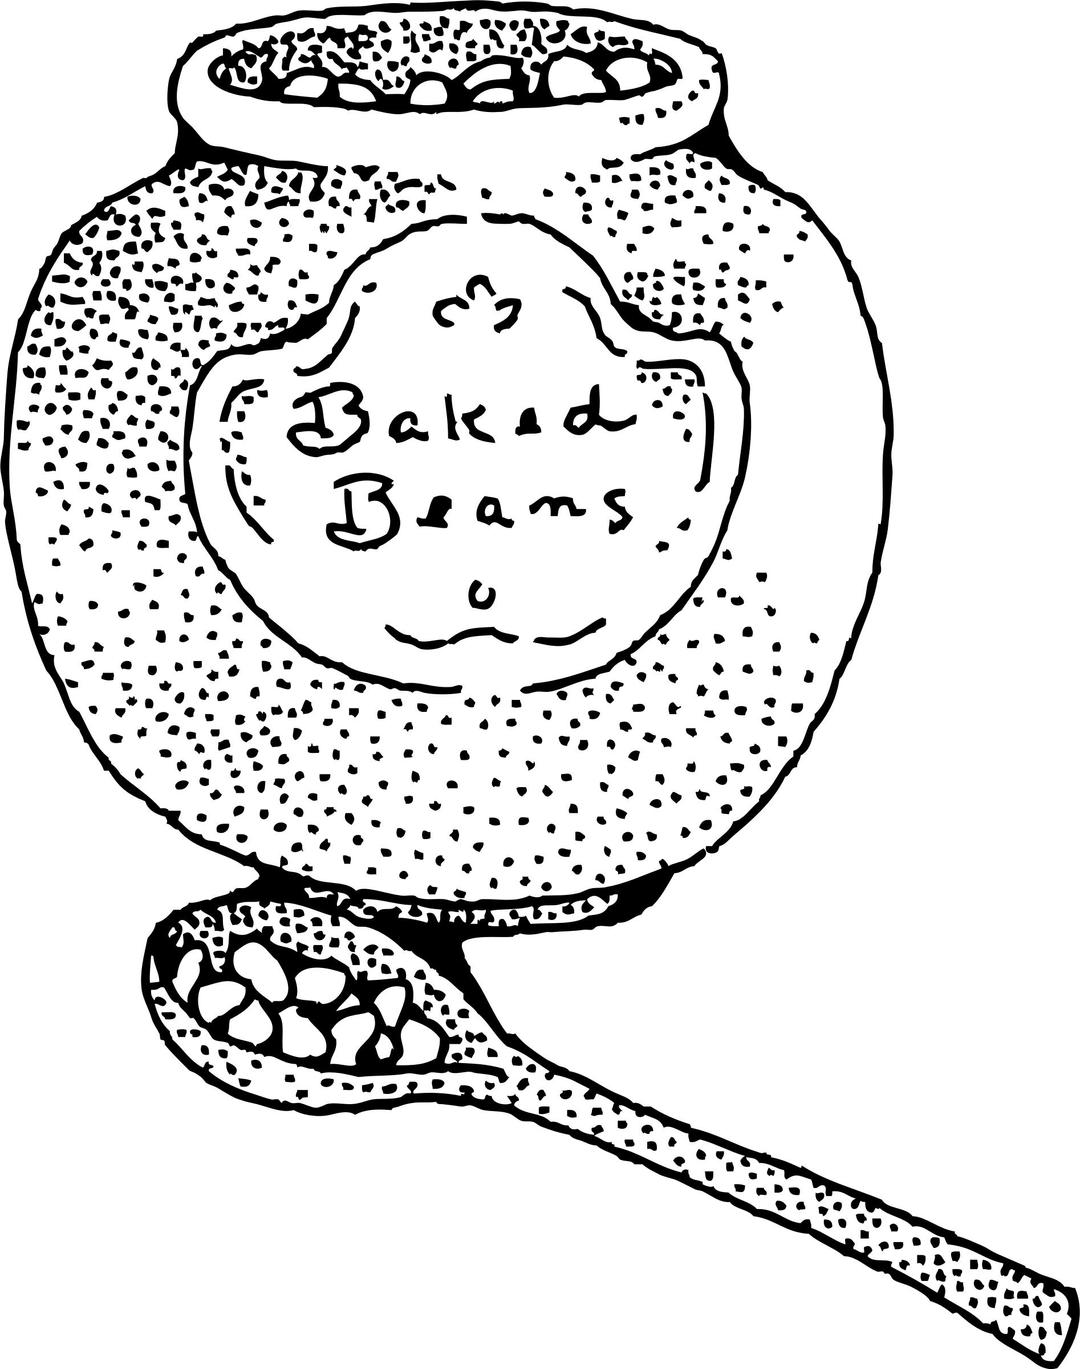 baked beans png transparent